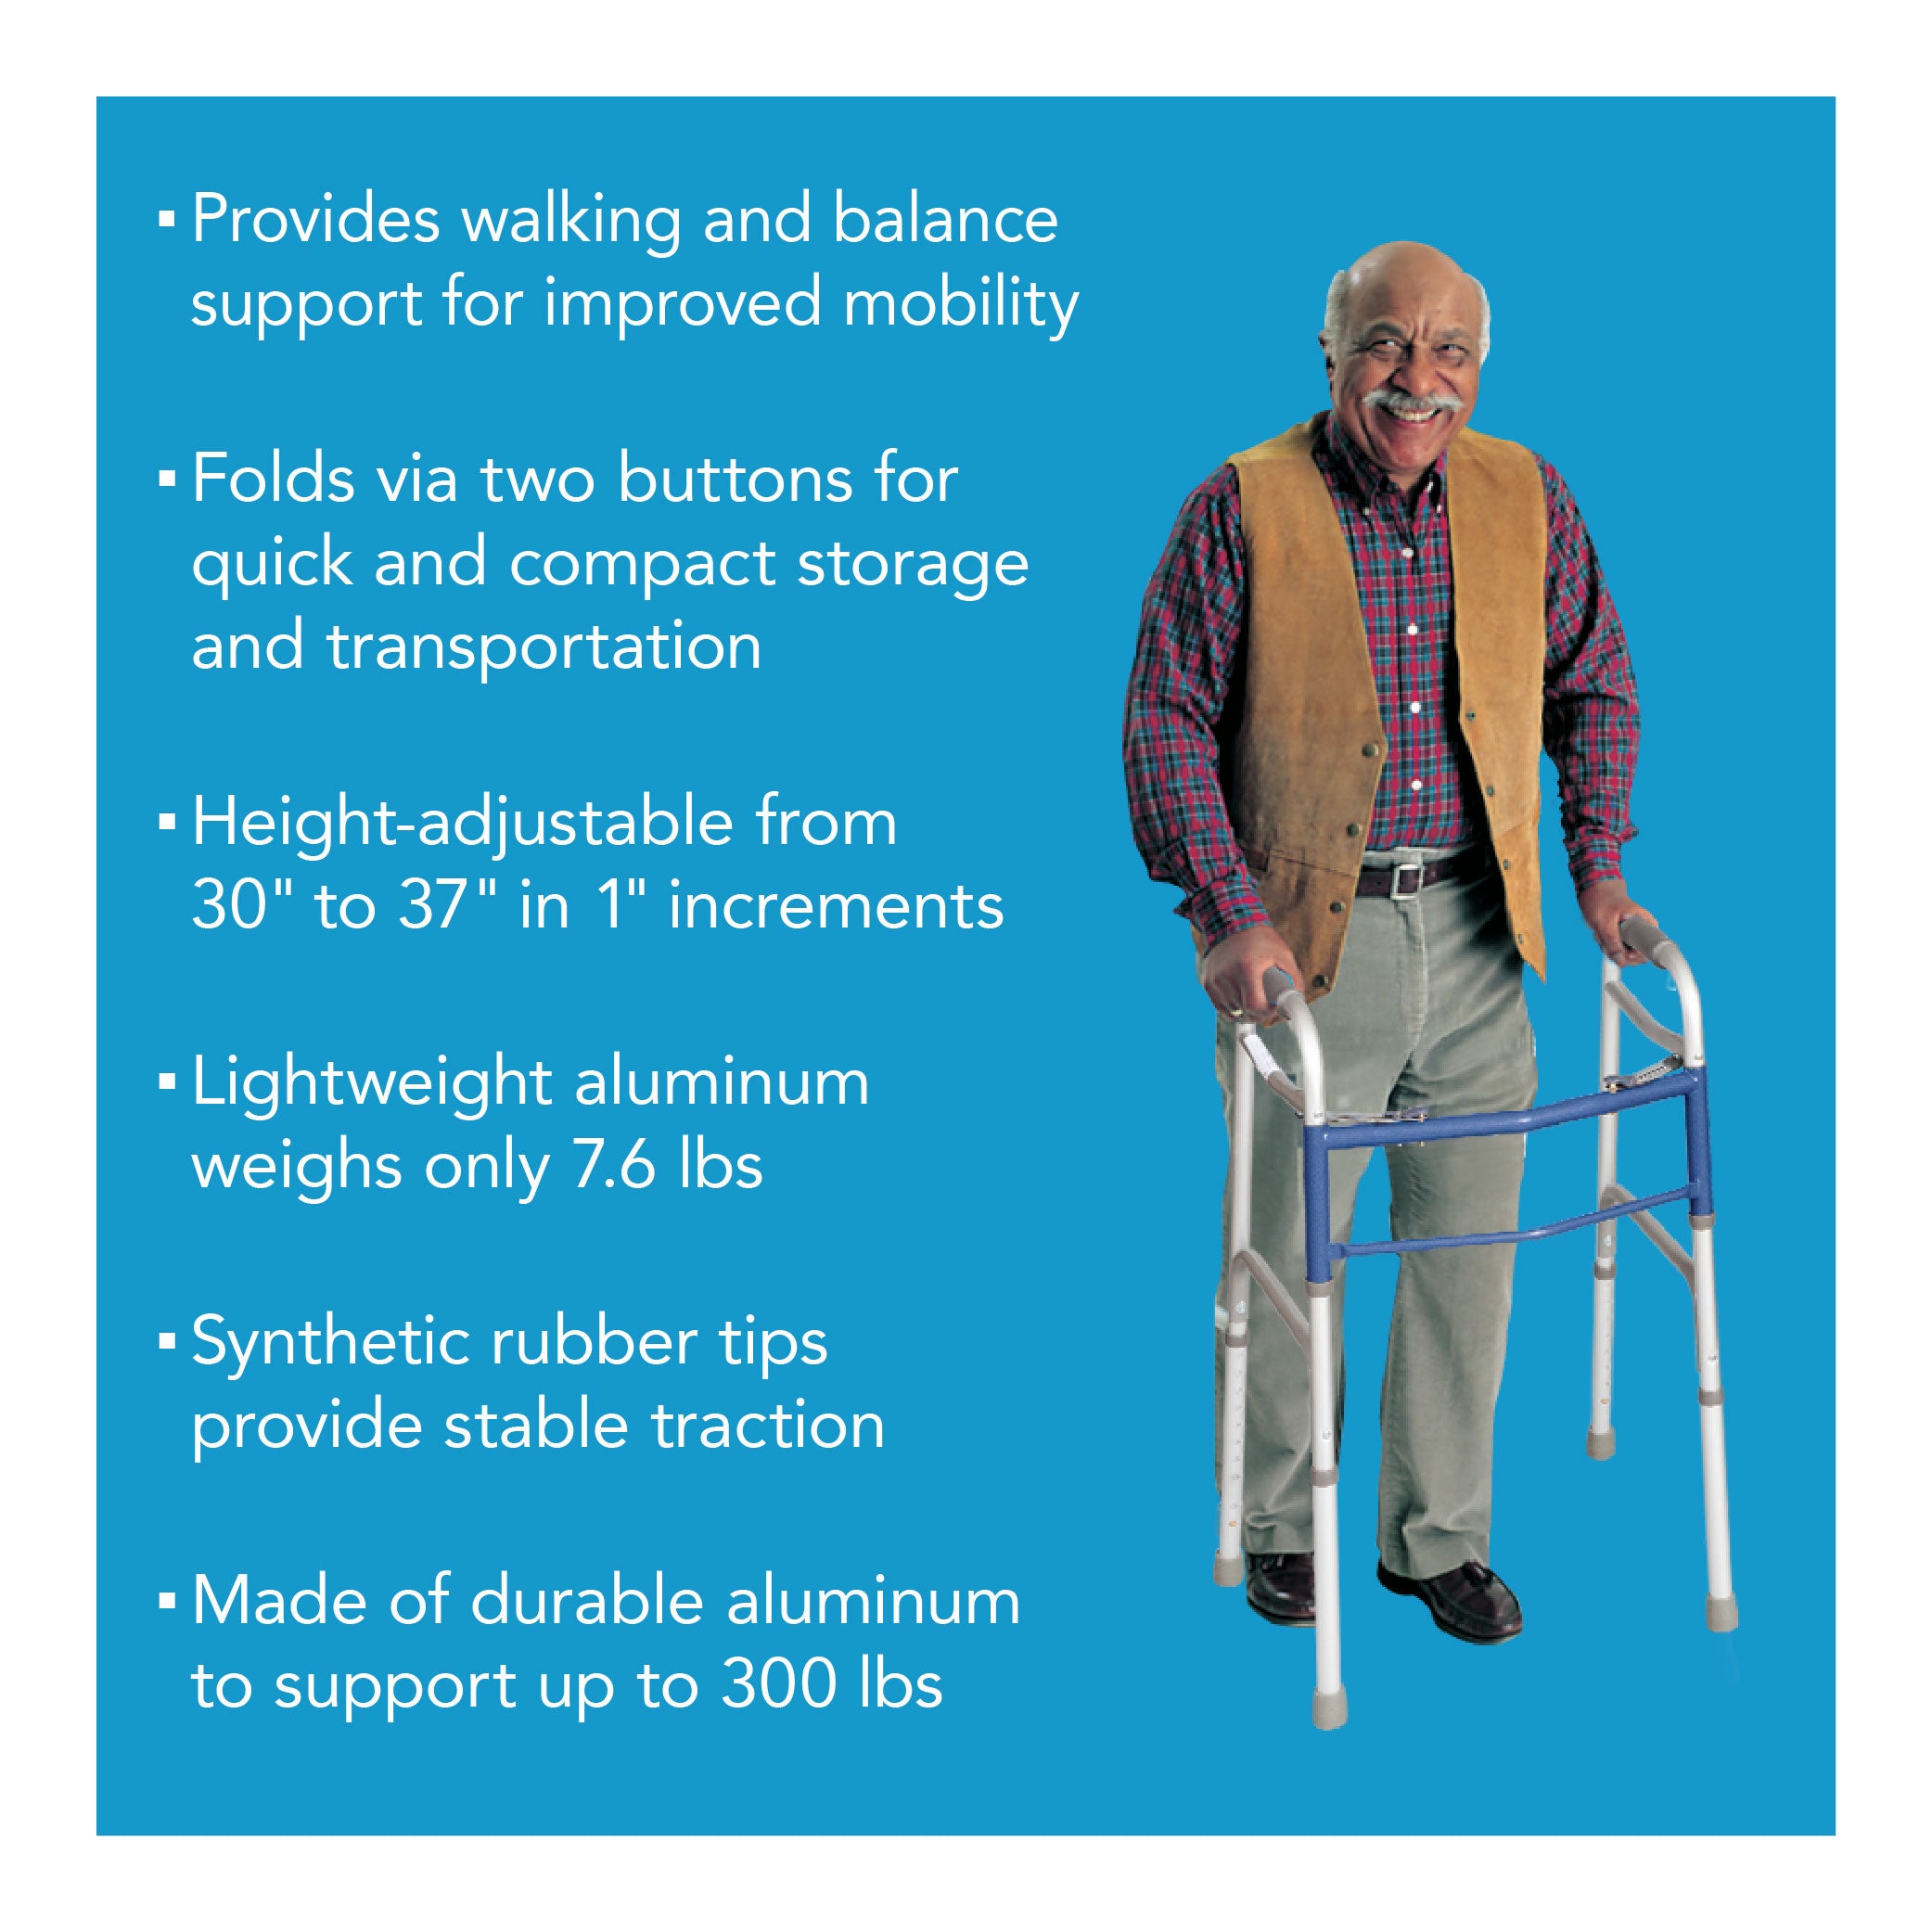 An elderly man walking with a dual button walker. Text showing the product's features and benefits mentioned in the listing.